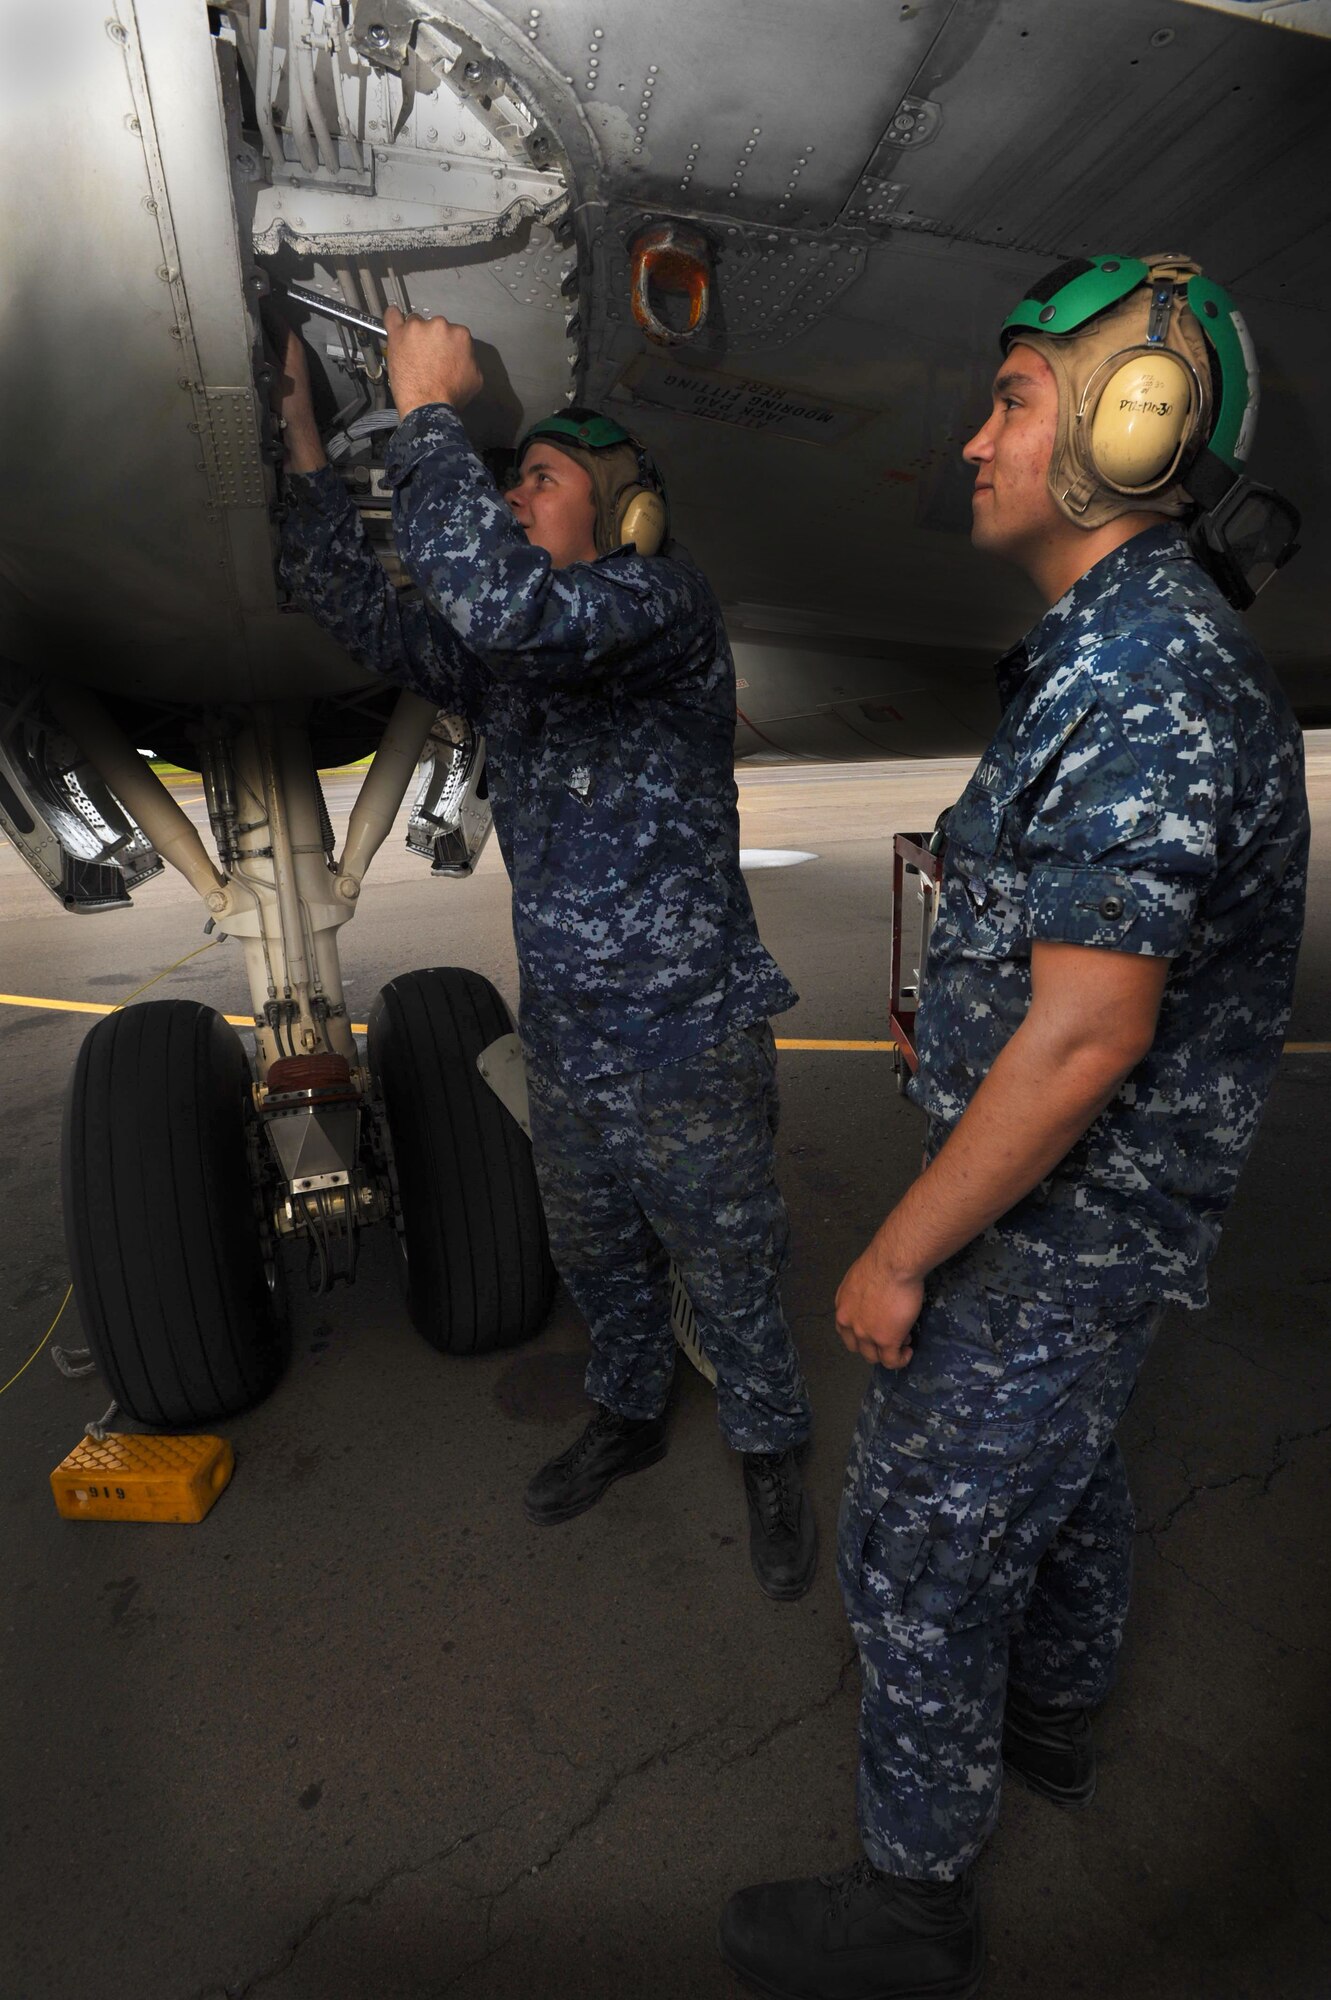 U.S. Navy Airman Joseph Hays, an aviation structural mechanic, checks the hydraulic line on the P-3 Orion as Airman Michael Dimio, also an aviatiion structural mechanic, looks on on the 15th Wing flightline Jan. 6. The aircraft are temporarily being housed by the 15th Wing due to runway construction at Marine Corps Base Hawaii. The P-3s were initially released to the Navy in 1962 and are used to detect enemy submarines and aircraft. They are also used to view battlespace in order to relay information instantaneously to ground troops. (U.S. Air Force Photo/Airman 1st Class Lauren Main)